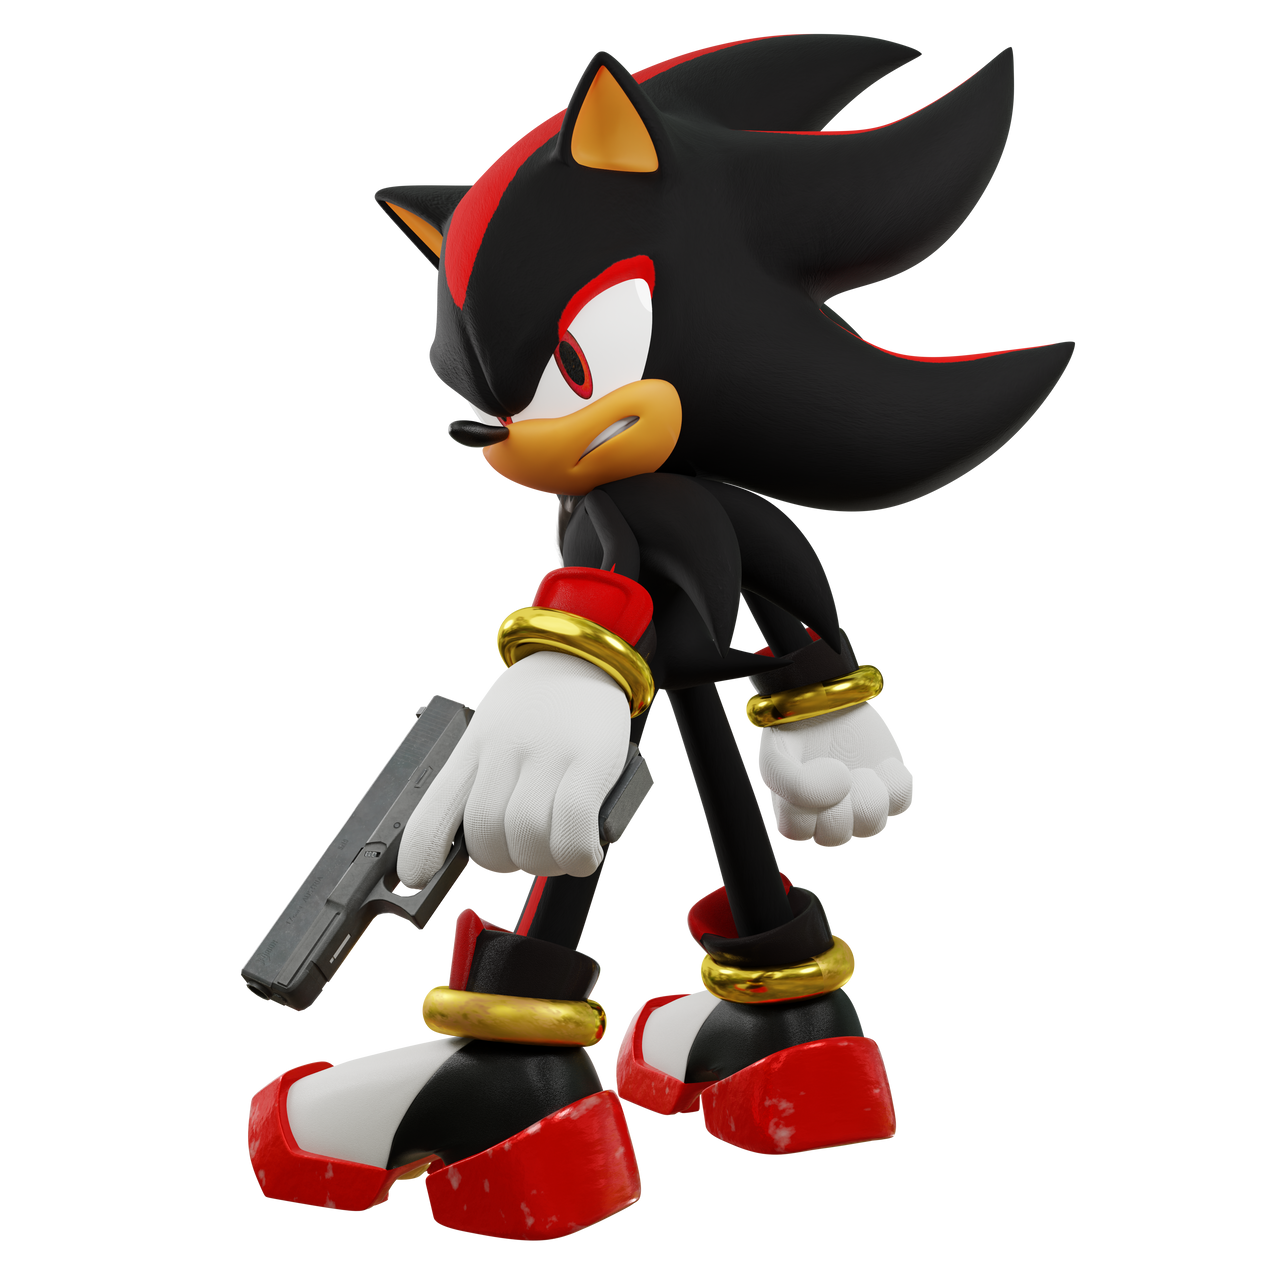 Shadow with a gun (damaged shoes ver.) by mlgpooya on DeviantArt